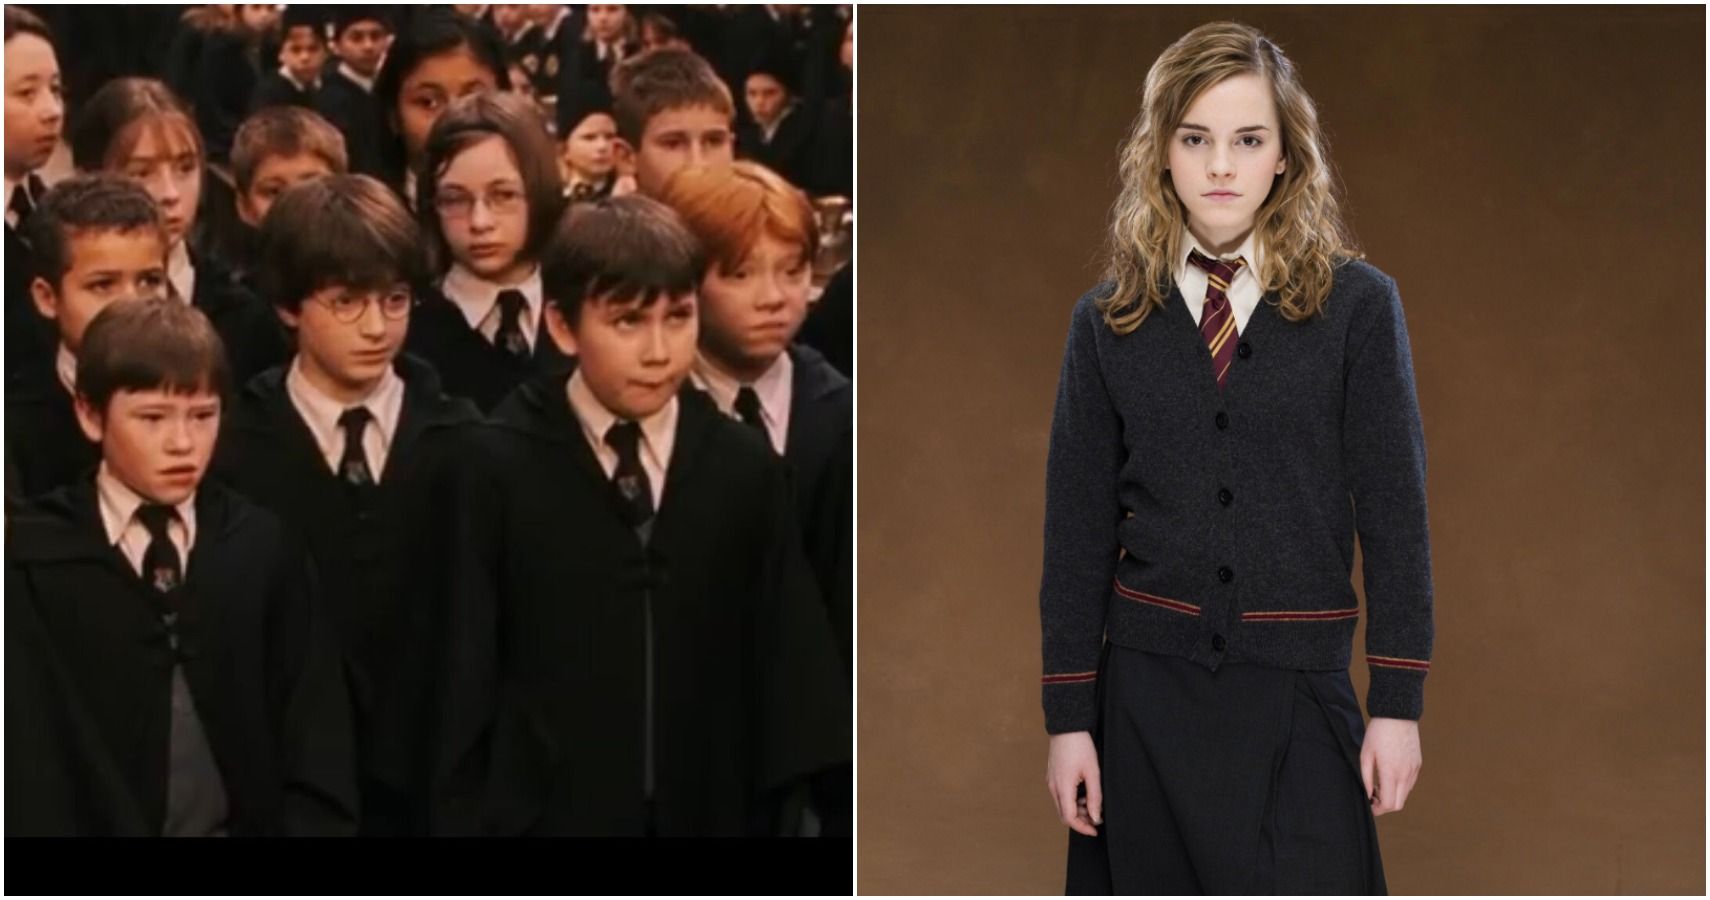 Clasificar Diploma Optimismo Harry Potter: 10 Details About The Hogwarts Uniforms You Didn't Notice